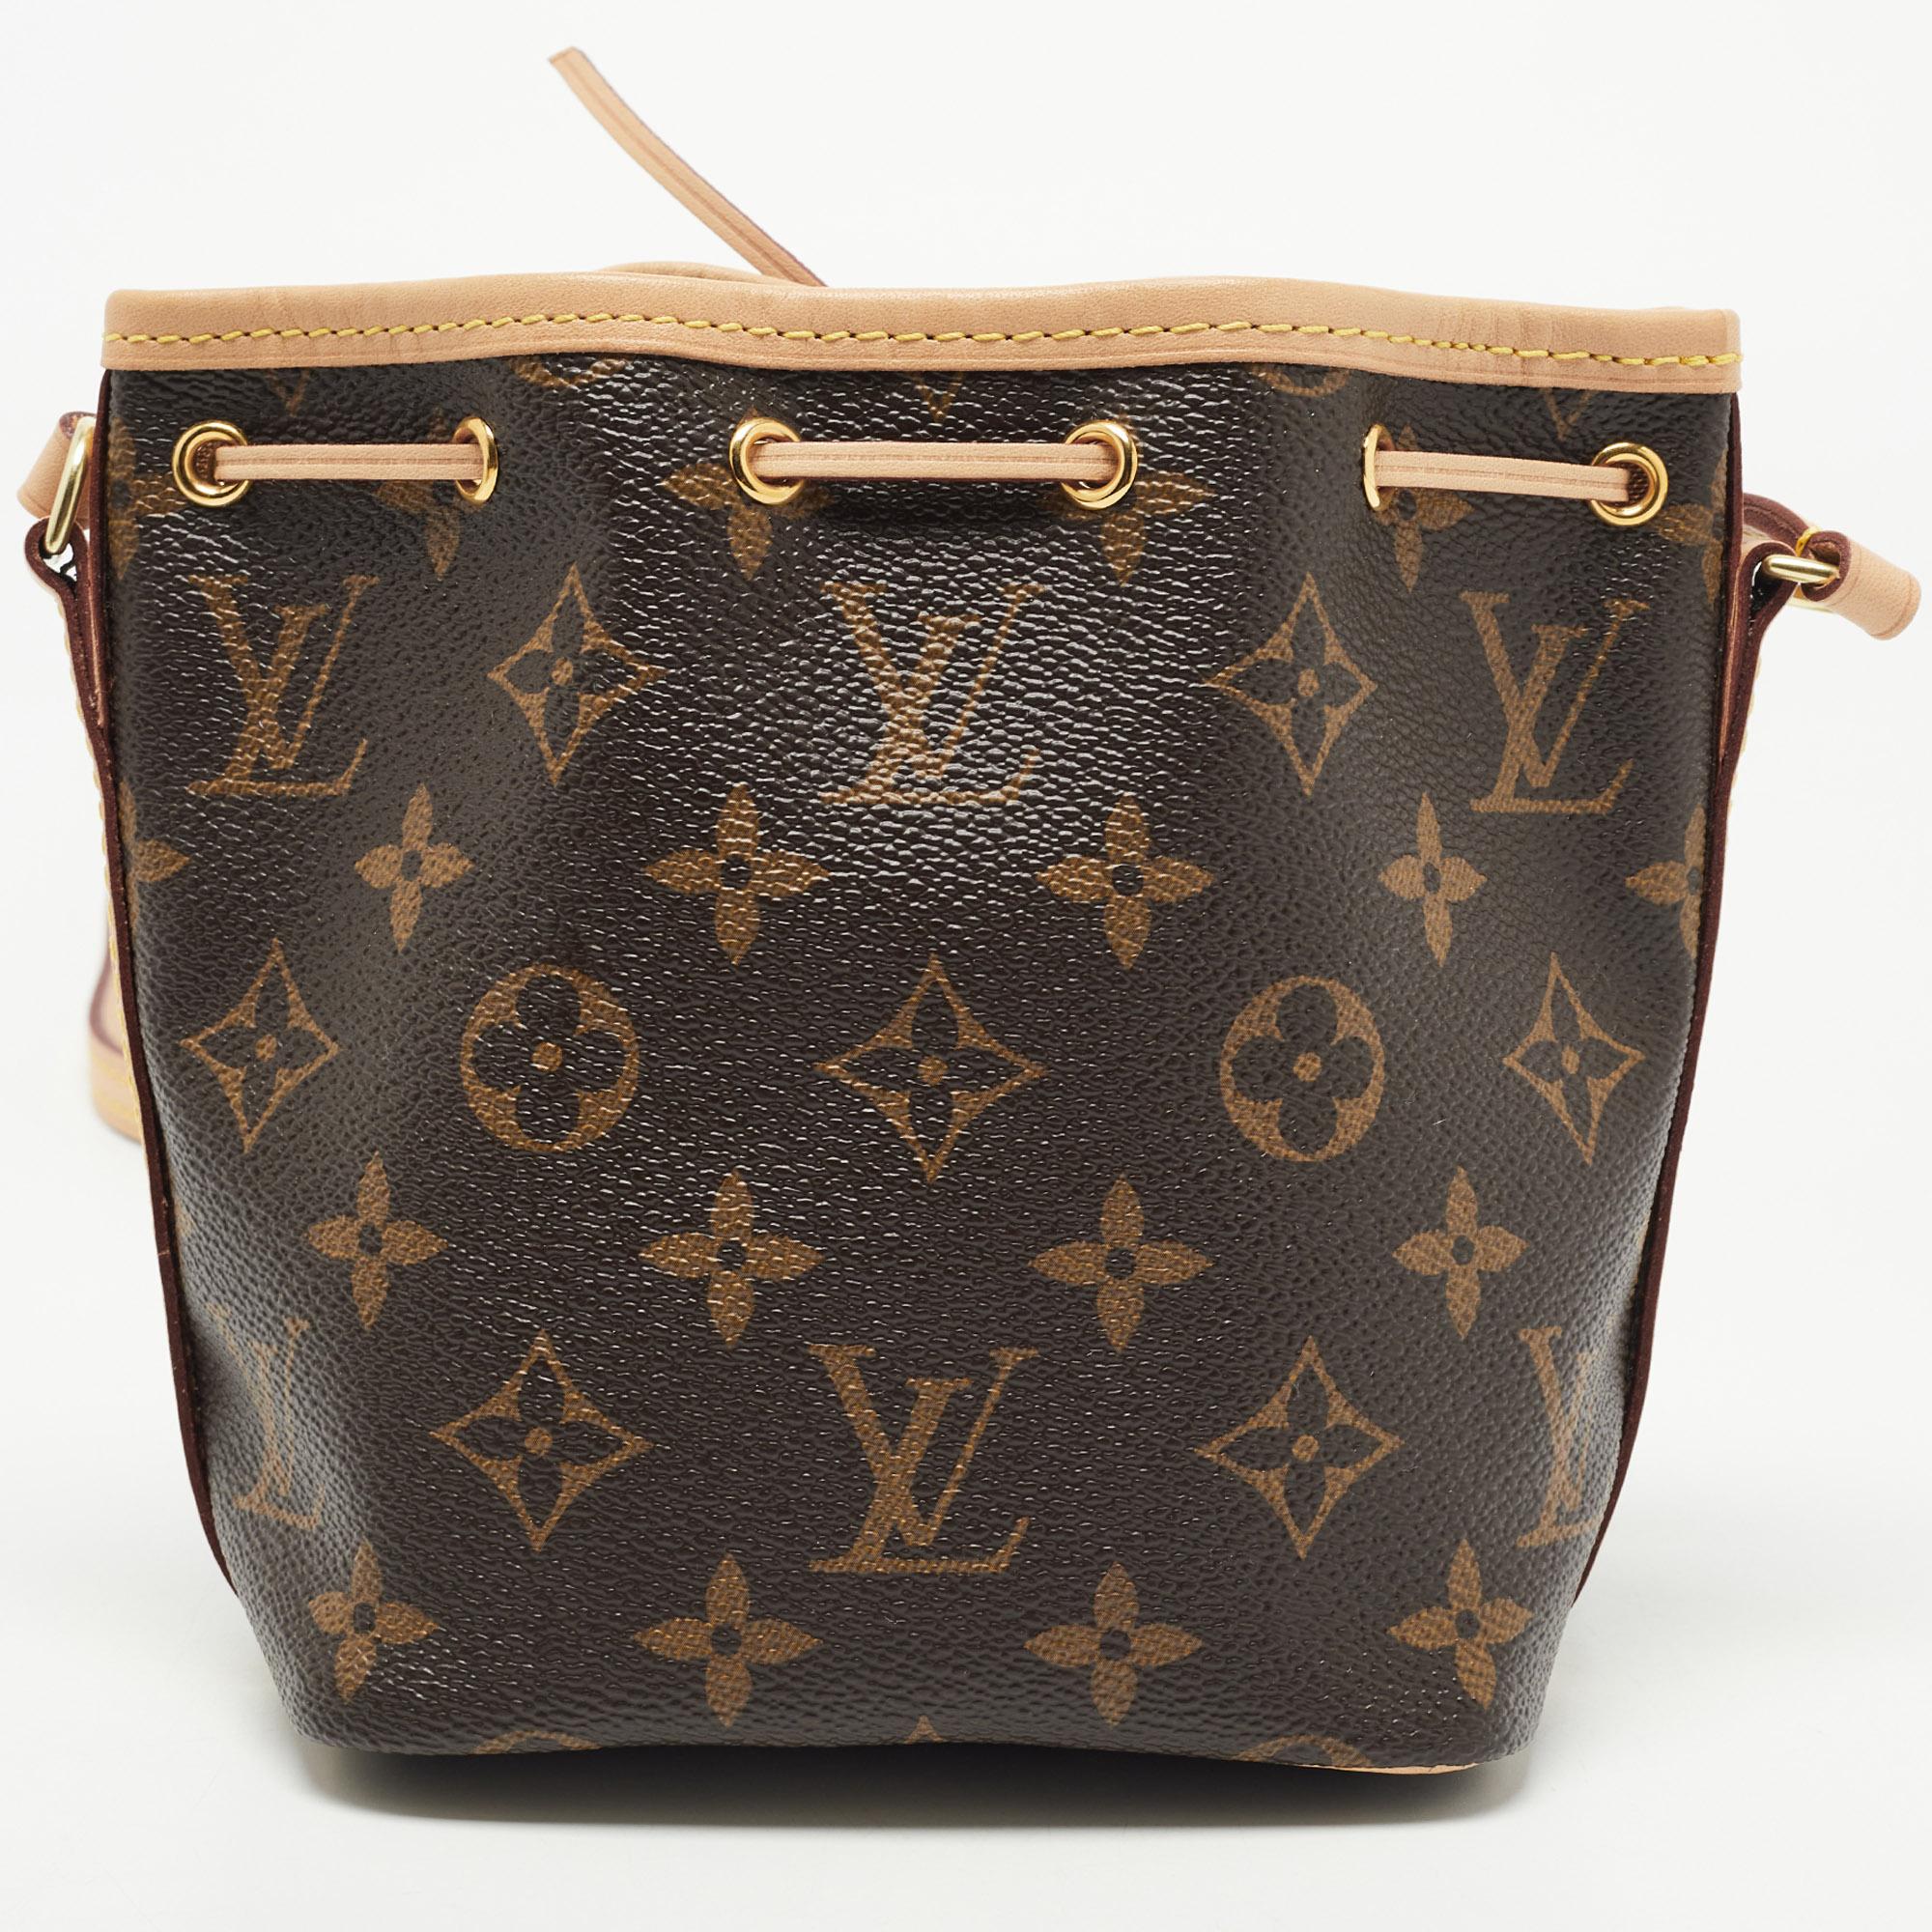 This Nano Neo bag brings forth Louis Vuitton's expertise in creating handbags. Crafted from Monogram canvas, the bag comes with a leather shoulder strap. It is fastened by a drawstring closure and lined with canvas.

Includes: Original Dustbag